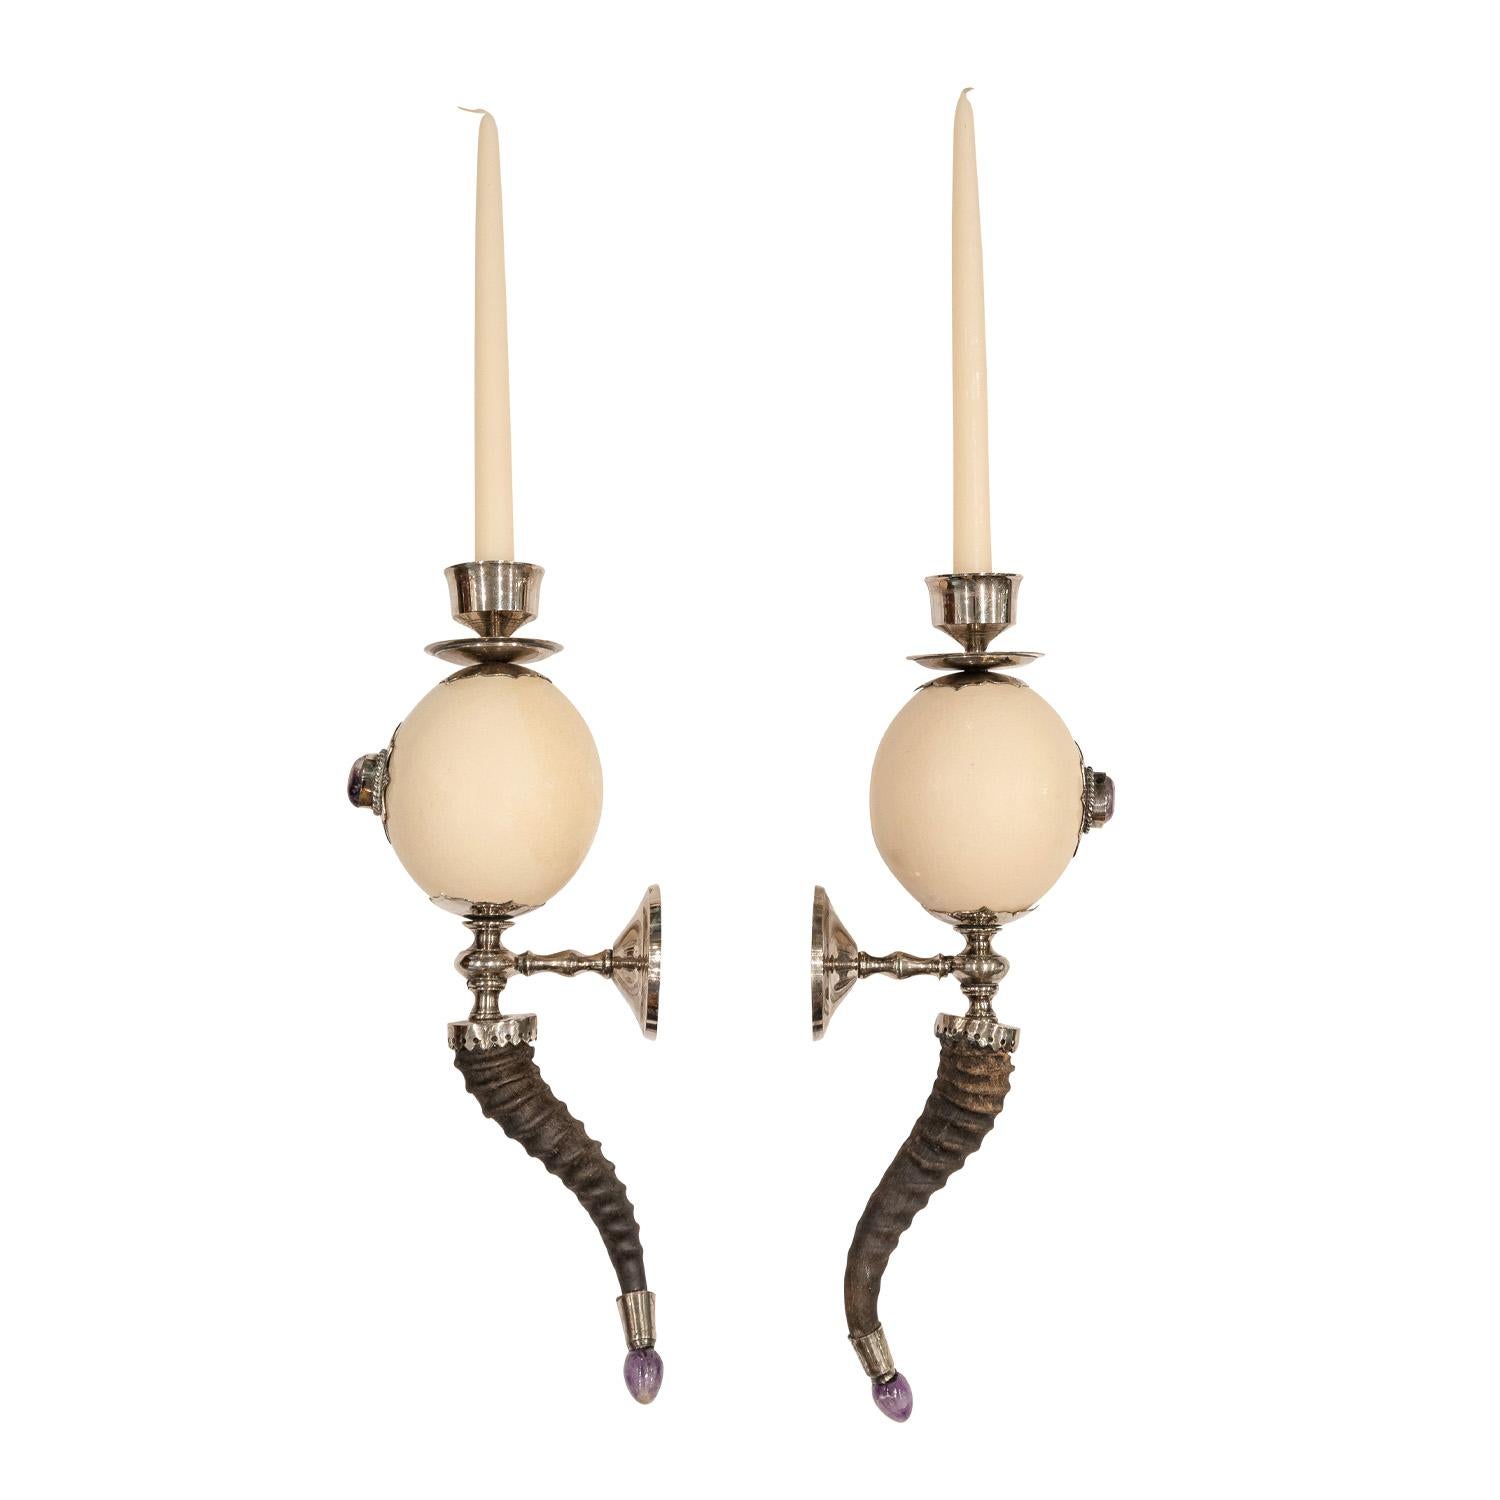 Mid-Century Modern J. Anthony Redmile Pair of Rare Ostrich Egg Wall Sconces 1970s 'Signed' For Sale